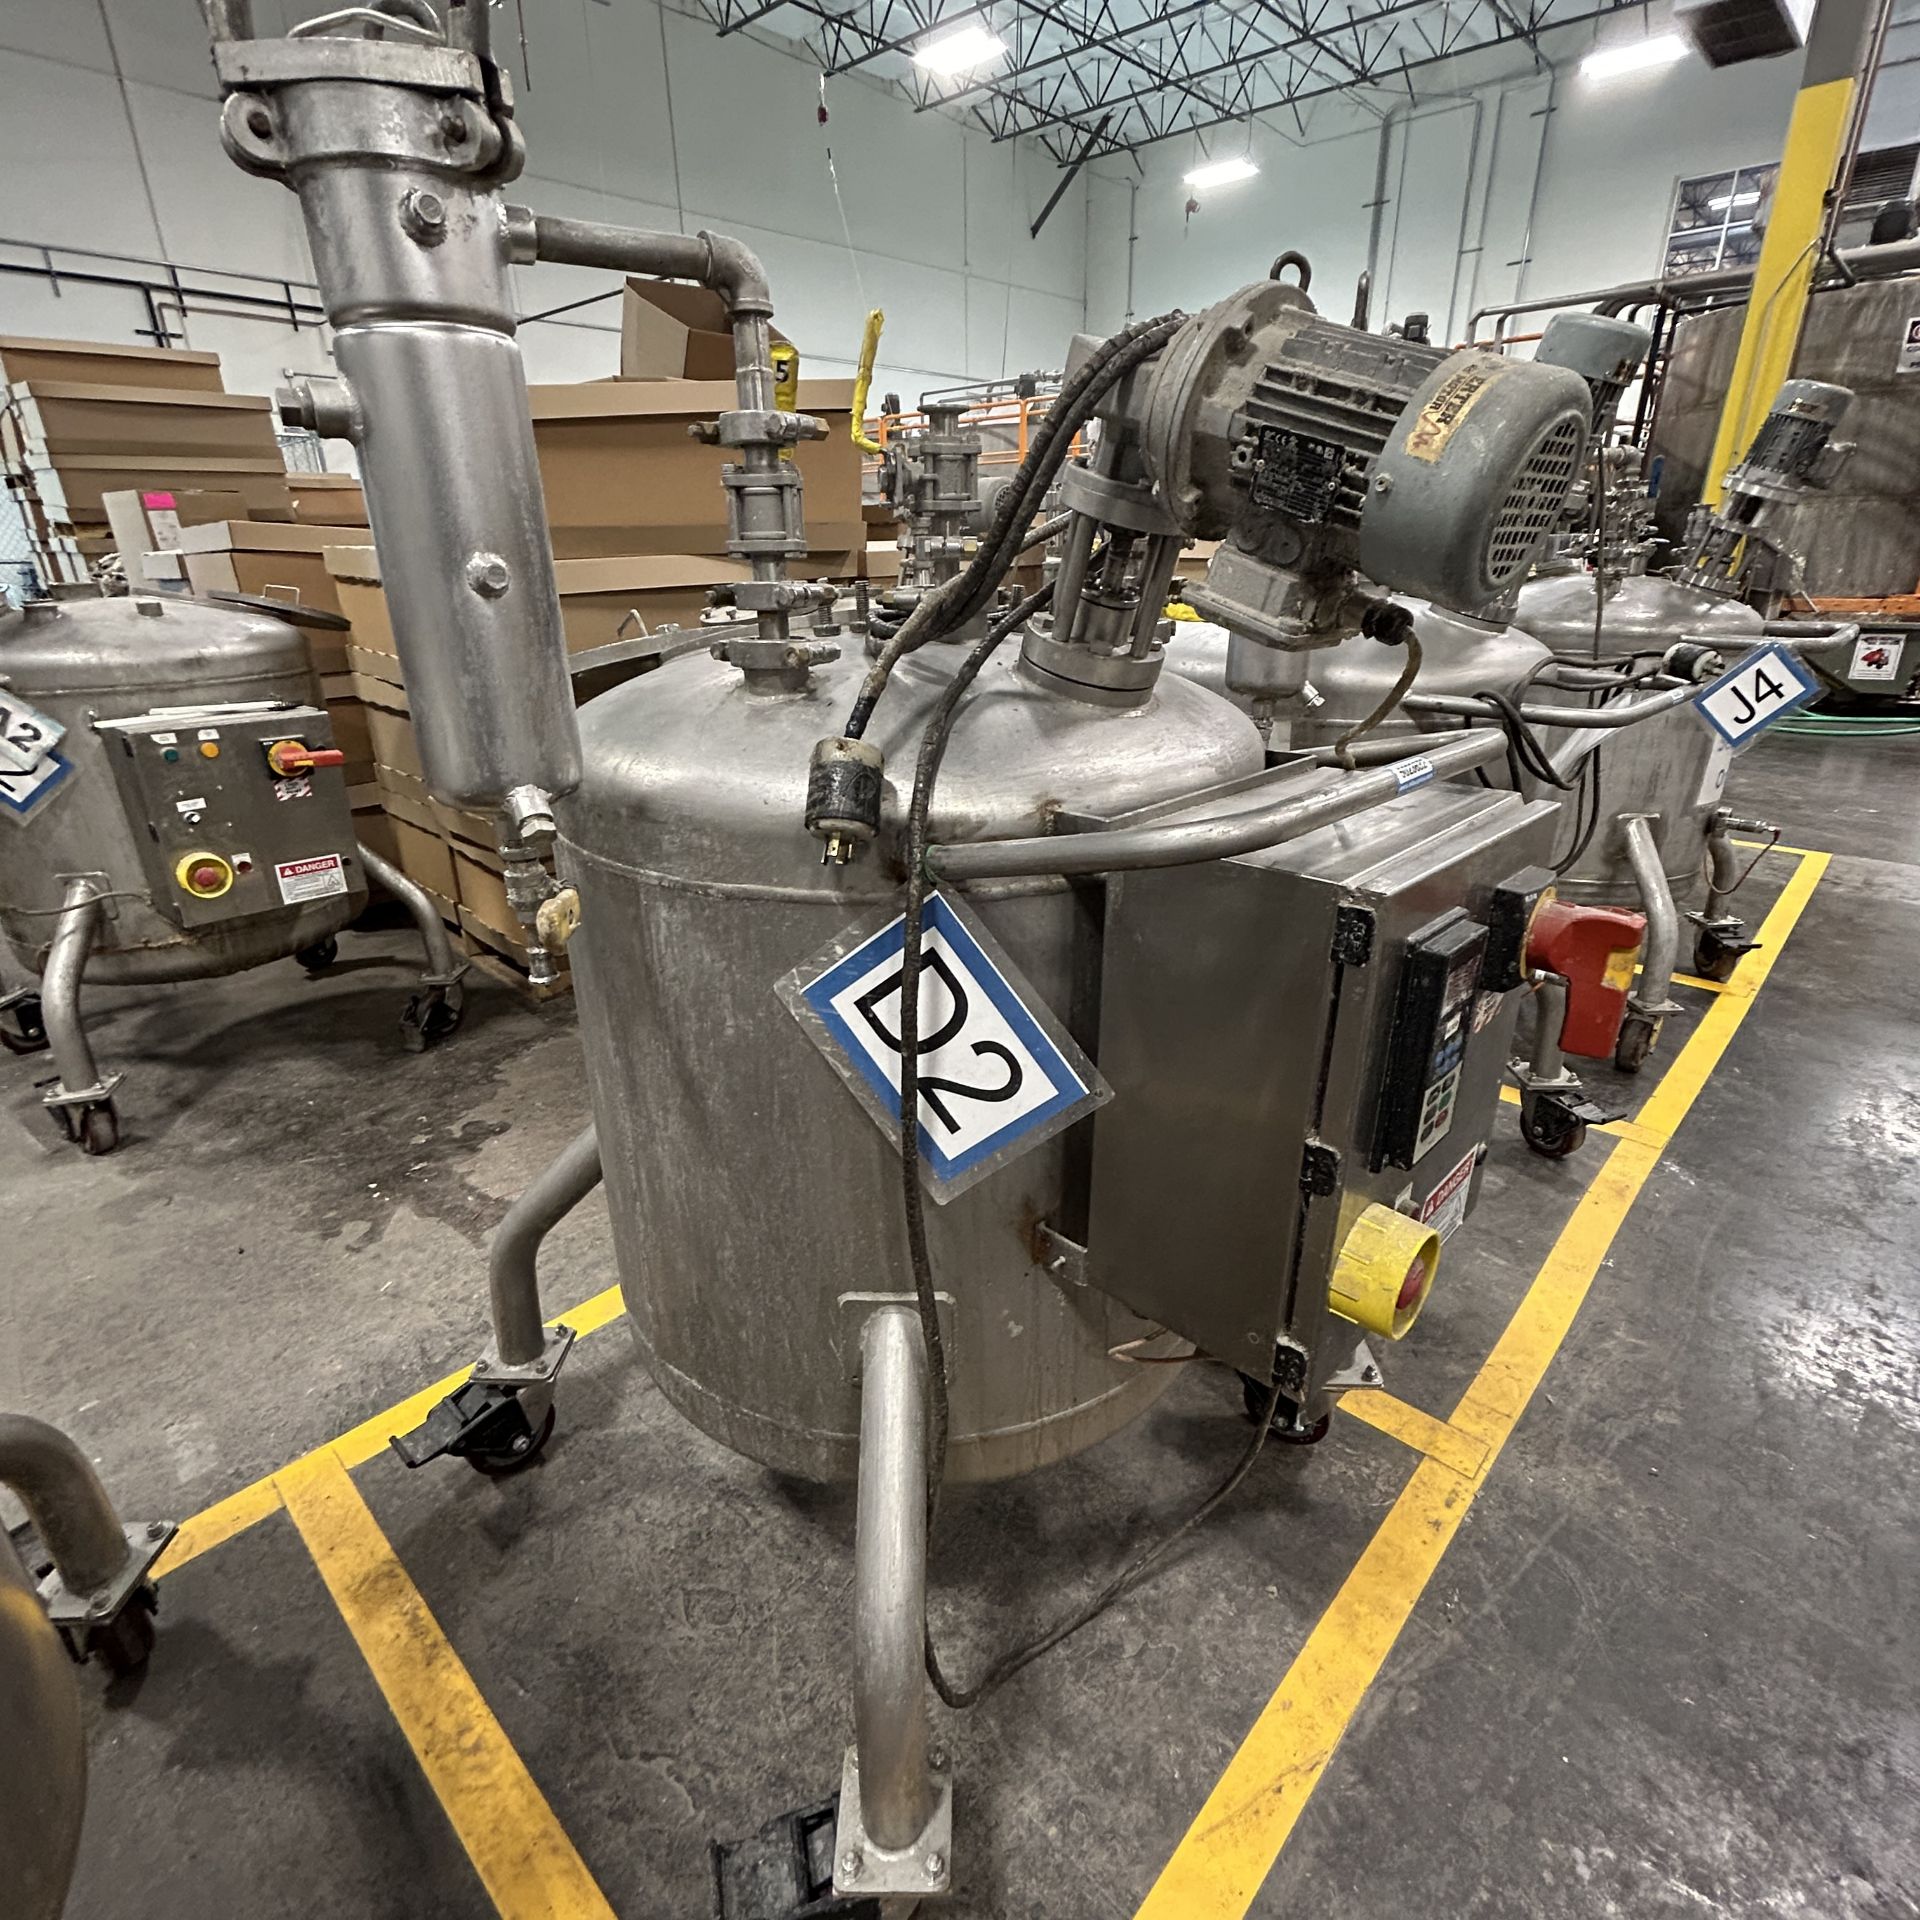 2020 Amherst Stainless Steel Agitation Pressure Pot - Image 2 of 6